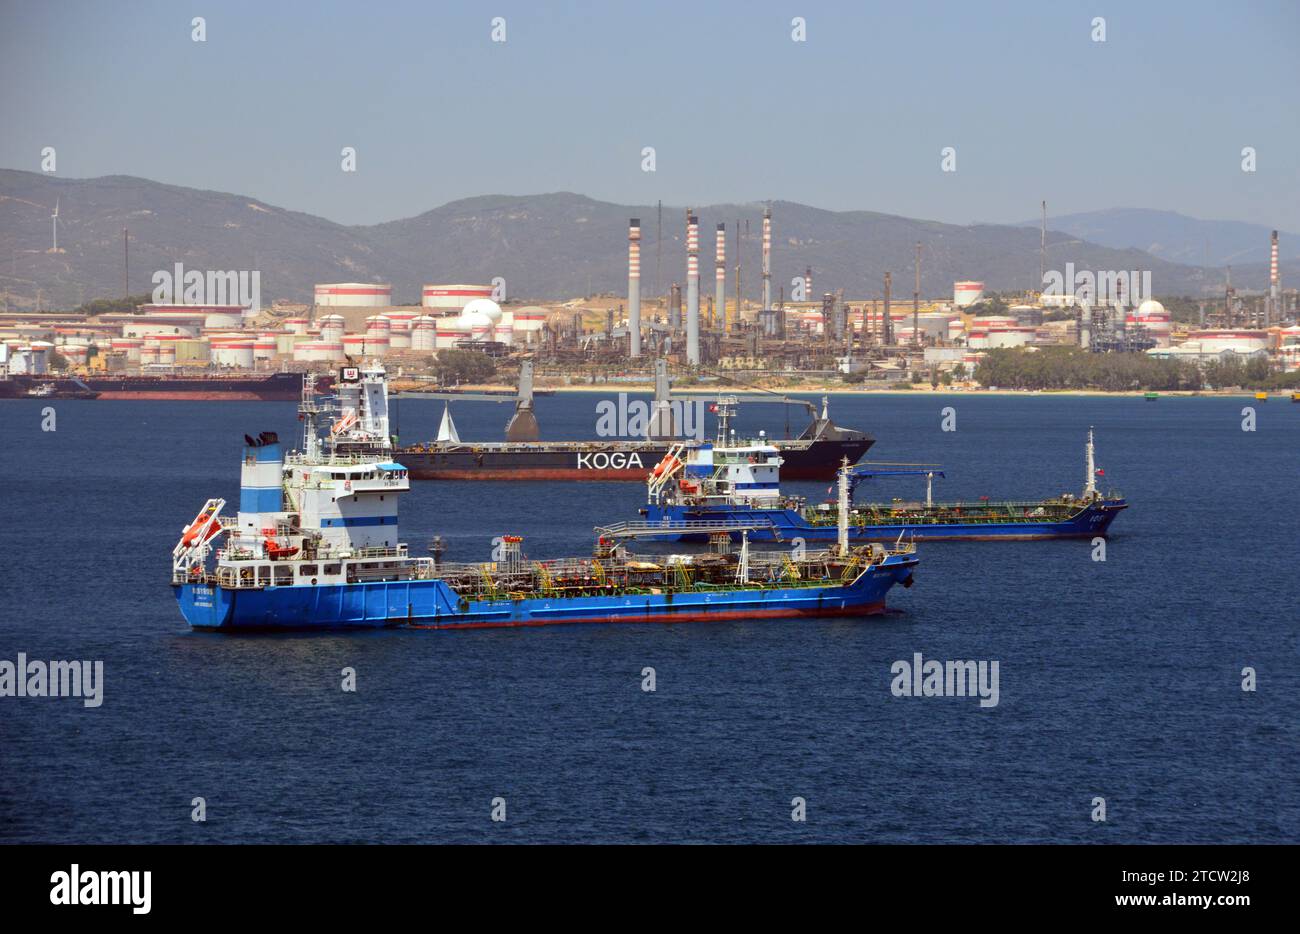 Three Ships the 'Nisyros' & 'IOS1' Chemical/Oil Tankers with Koga Royal' a Cargo Ship Anchoured in the Bay of Gibraltar, BTO, Spain, EU. Stock Photo